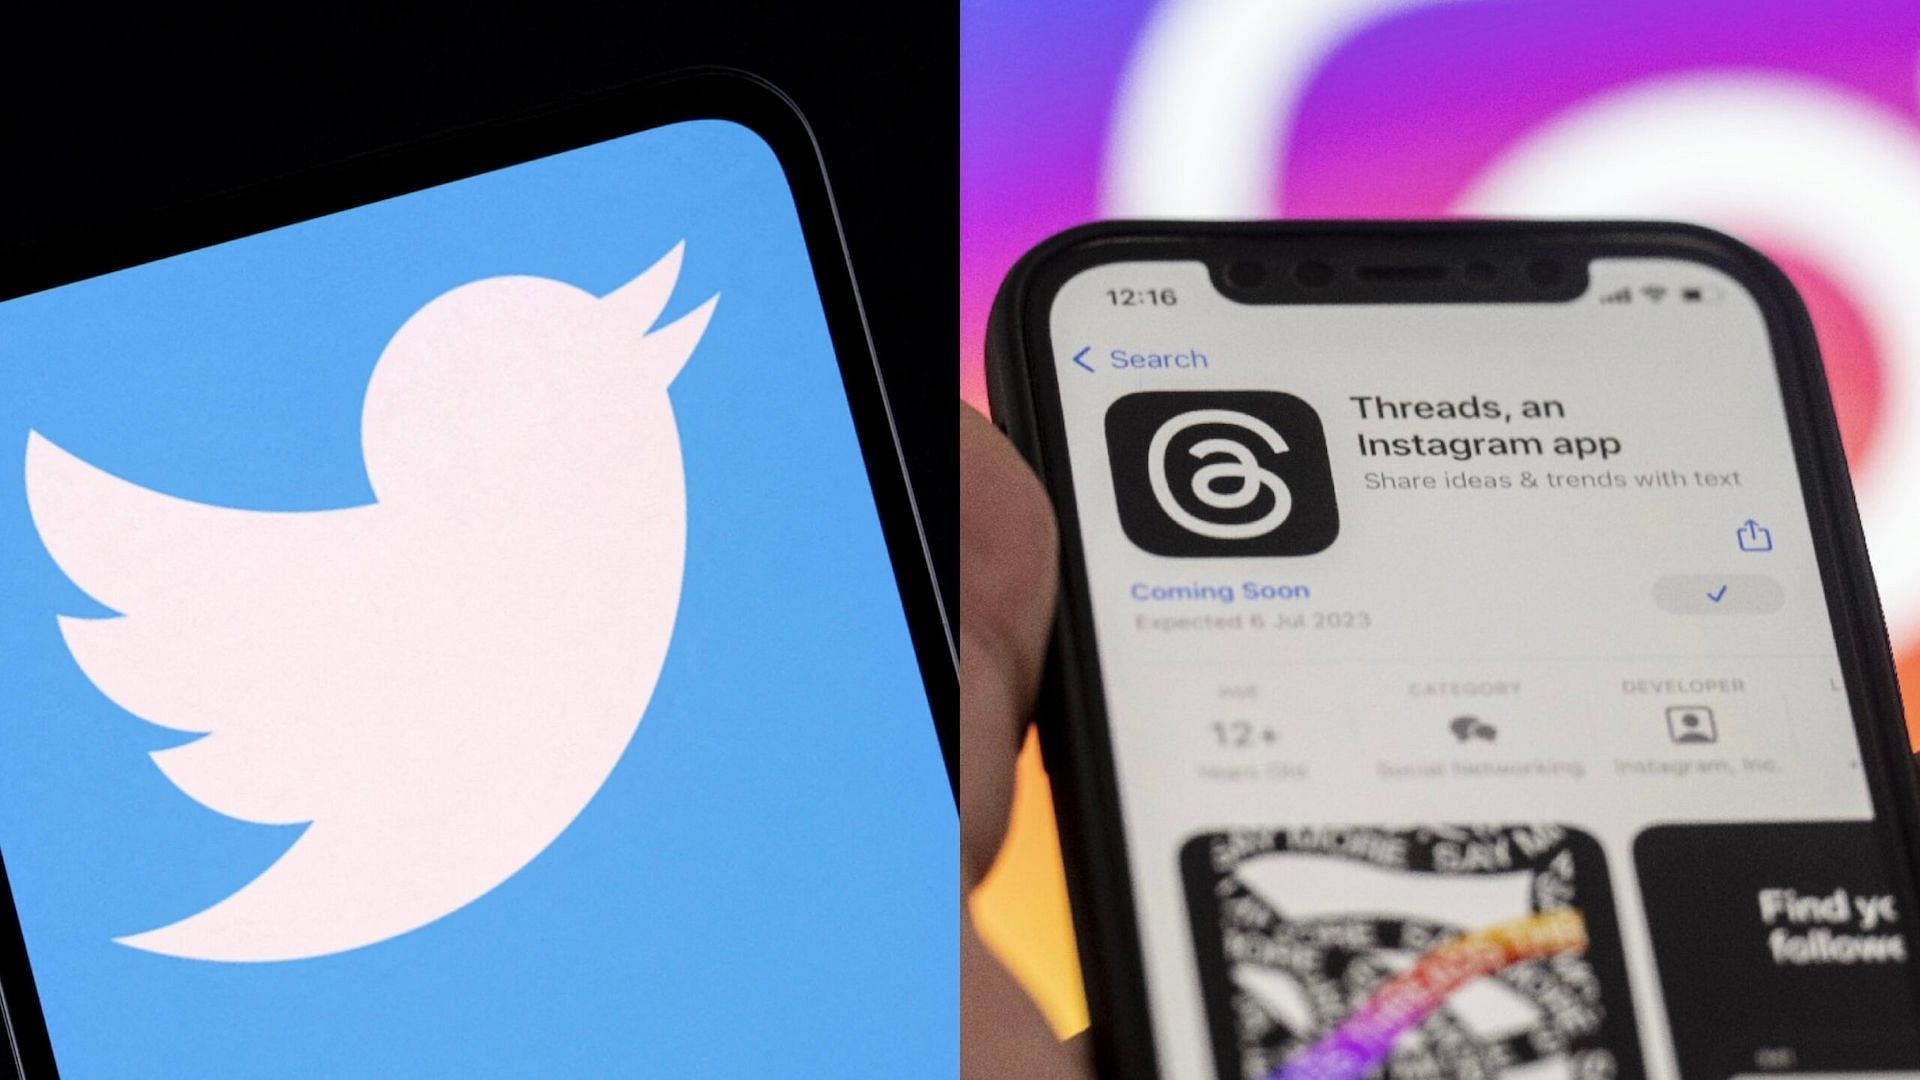 Twitter Logo on the left and Threads app on the right.